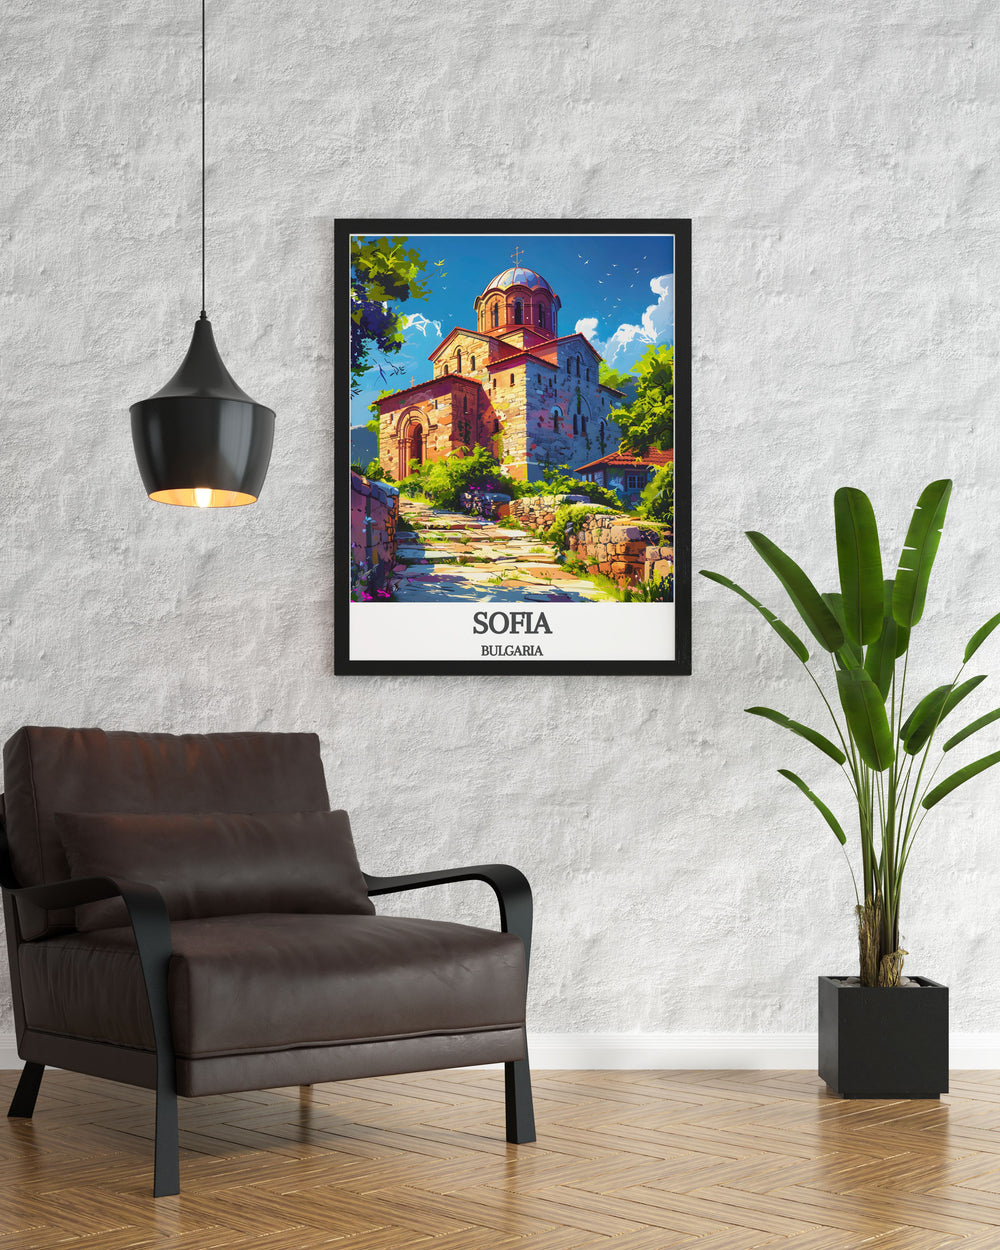 Beautiful Bulgaria Poster featuring the historic BULGARIA Rila Monastery a captivating piece of art print that adds charm to any room and makes an excellent gift.